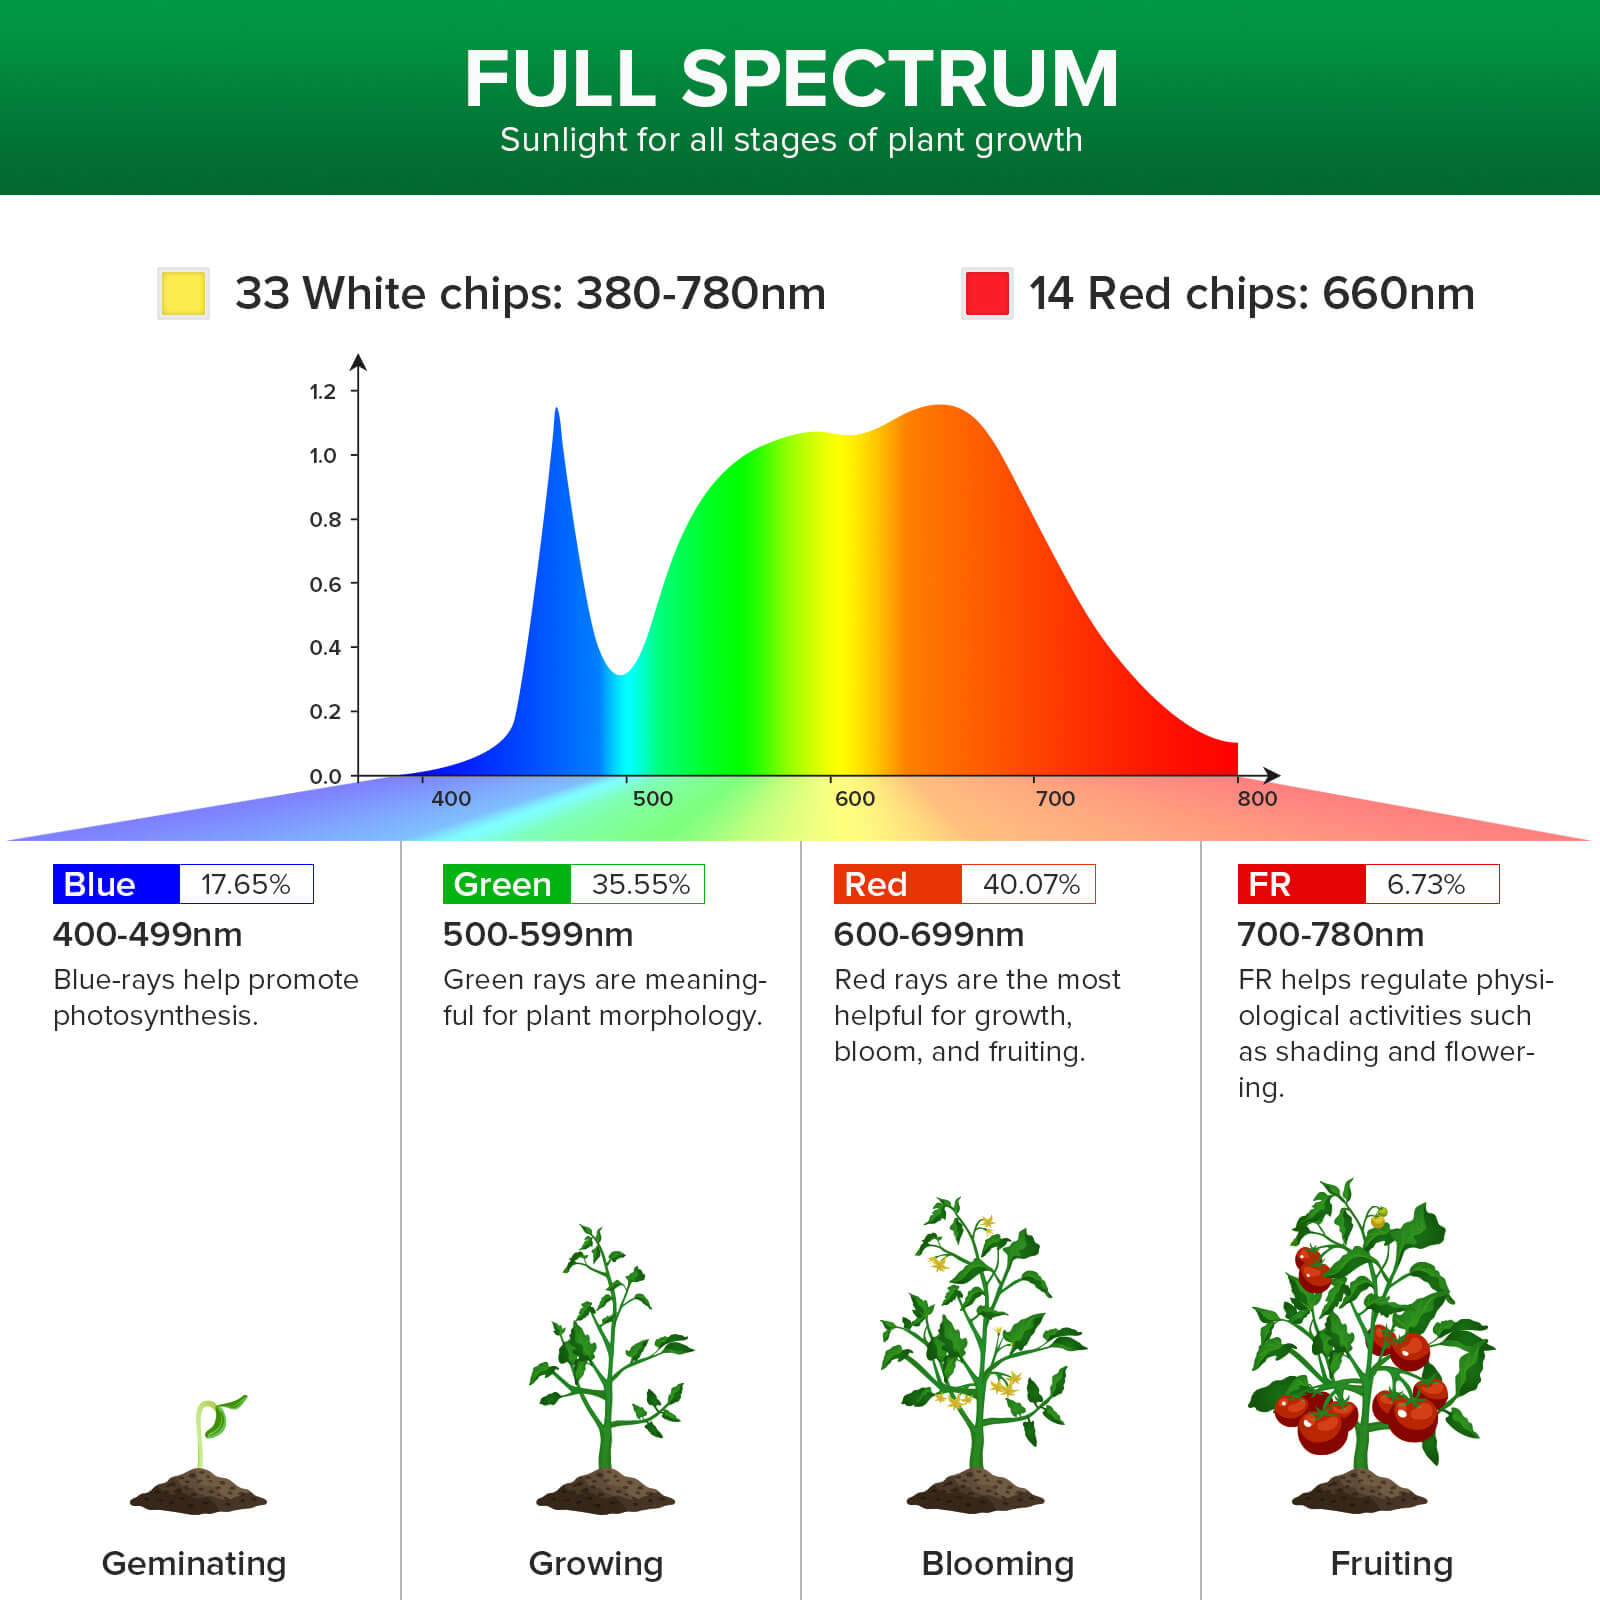 30W LED Grow Light With Tripod Stand has full spectrum.